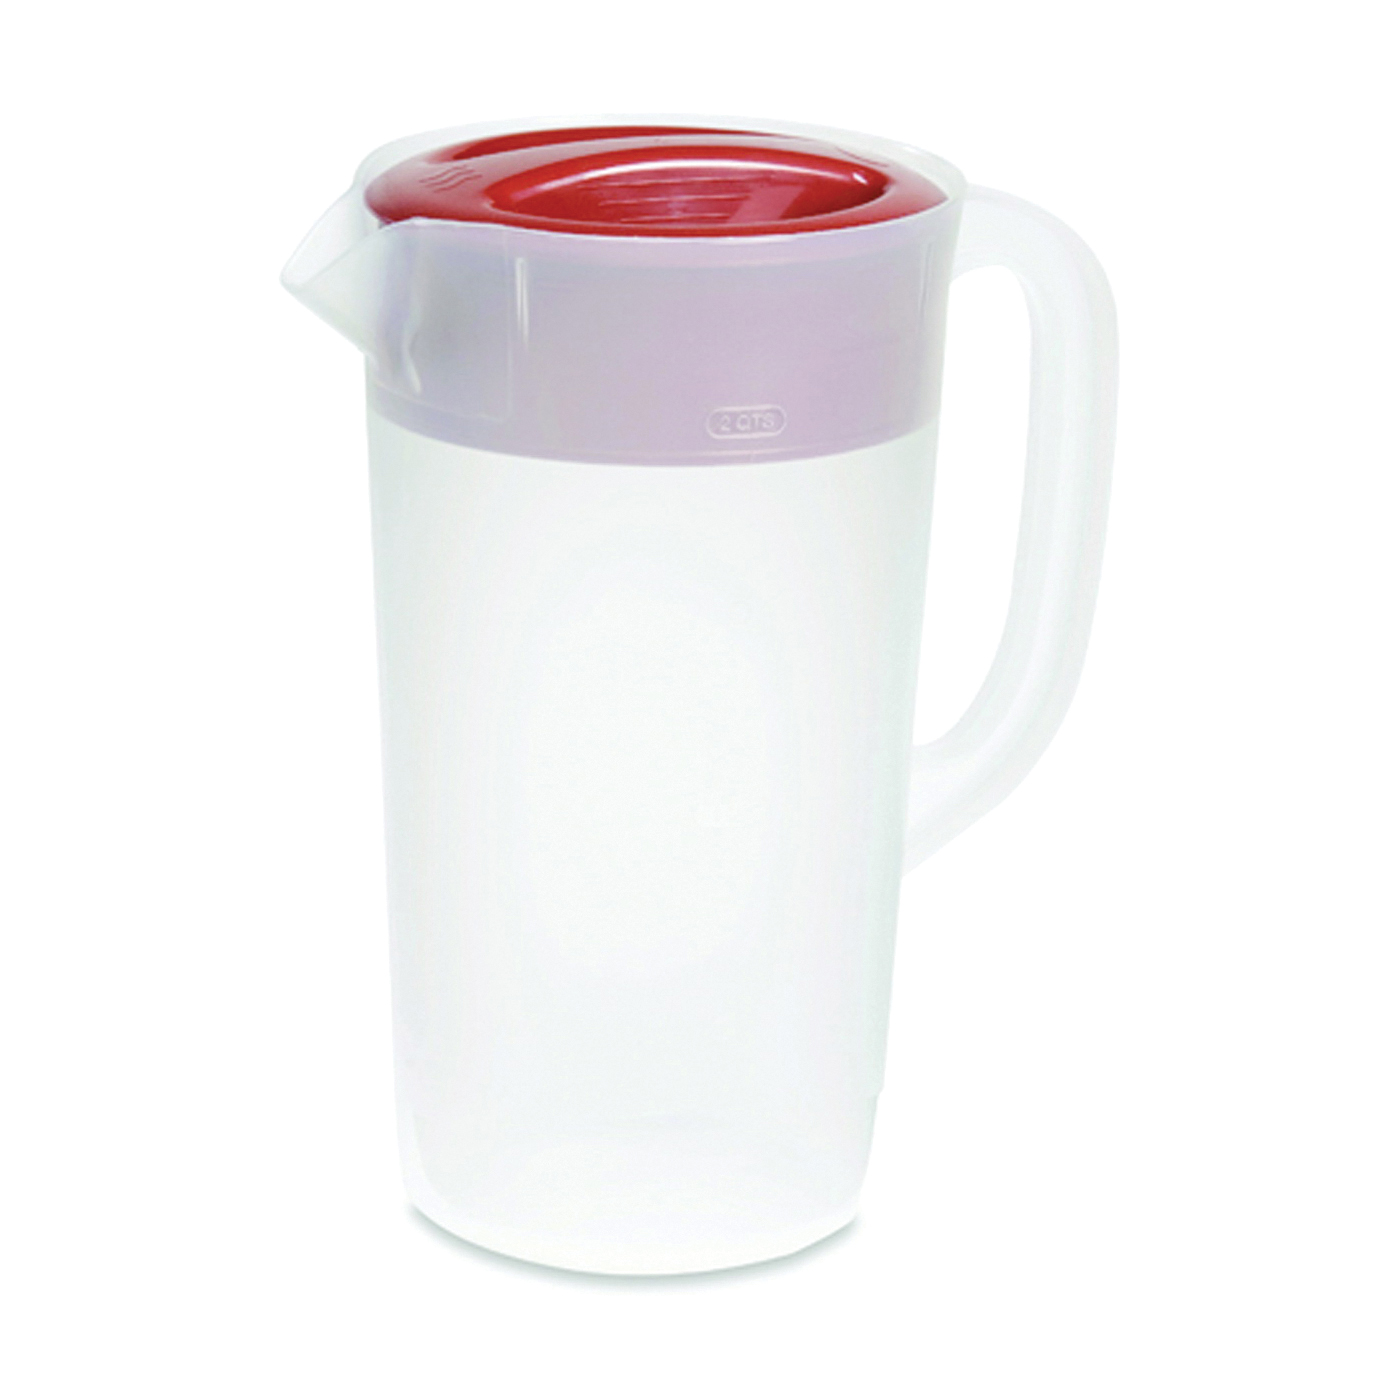 Rubbermaid 1777154 Pitcher, 2.25 qt Capacity, Plastic, Clear/Red - 1